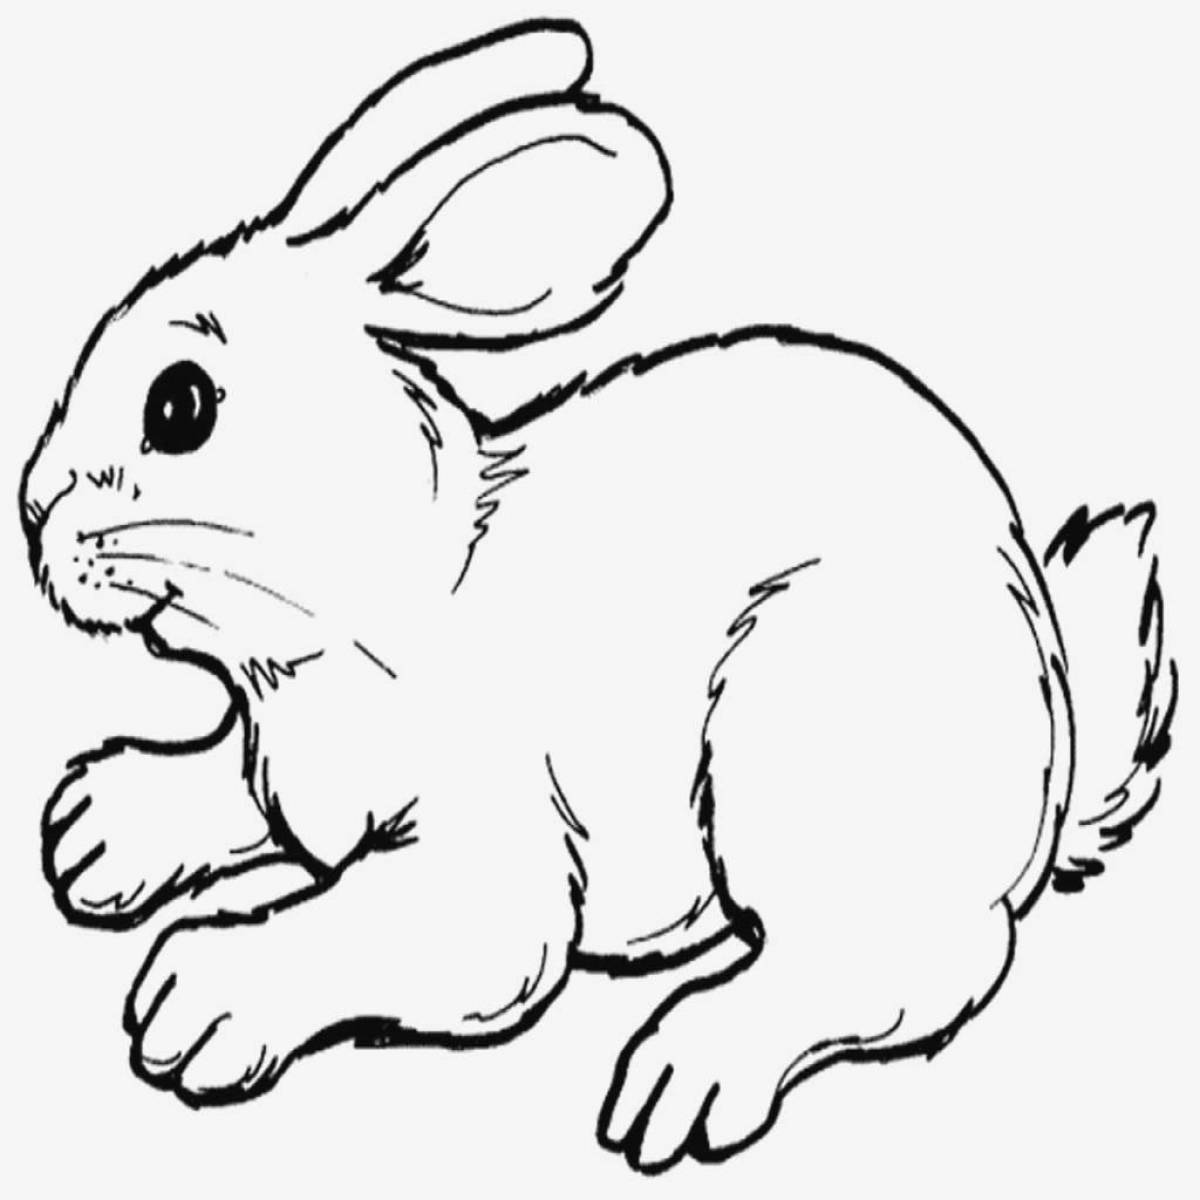 Coloring book cheerful hare rabbit